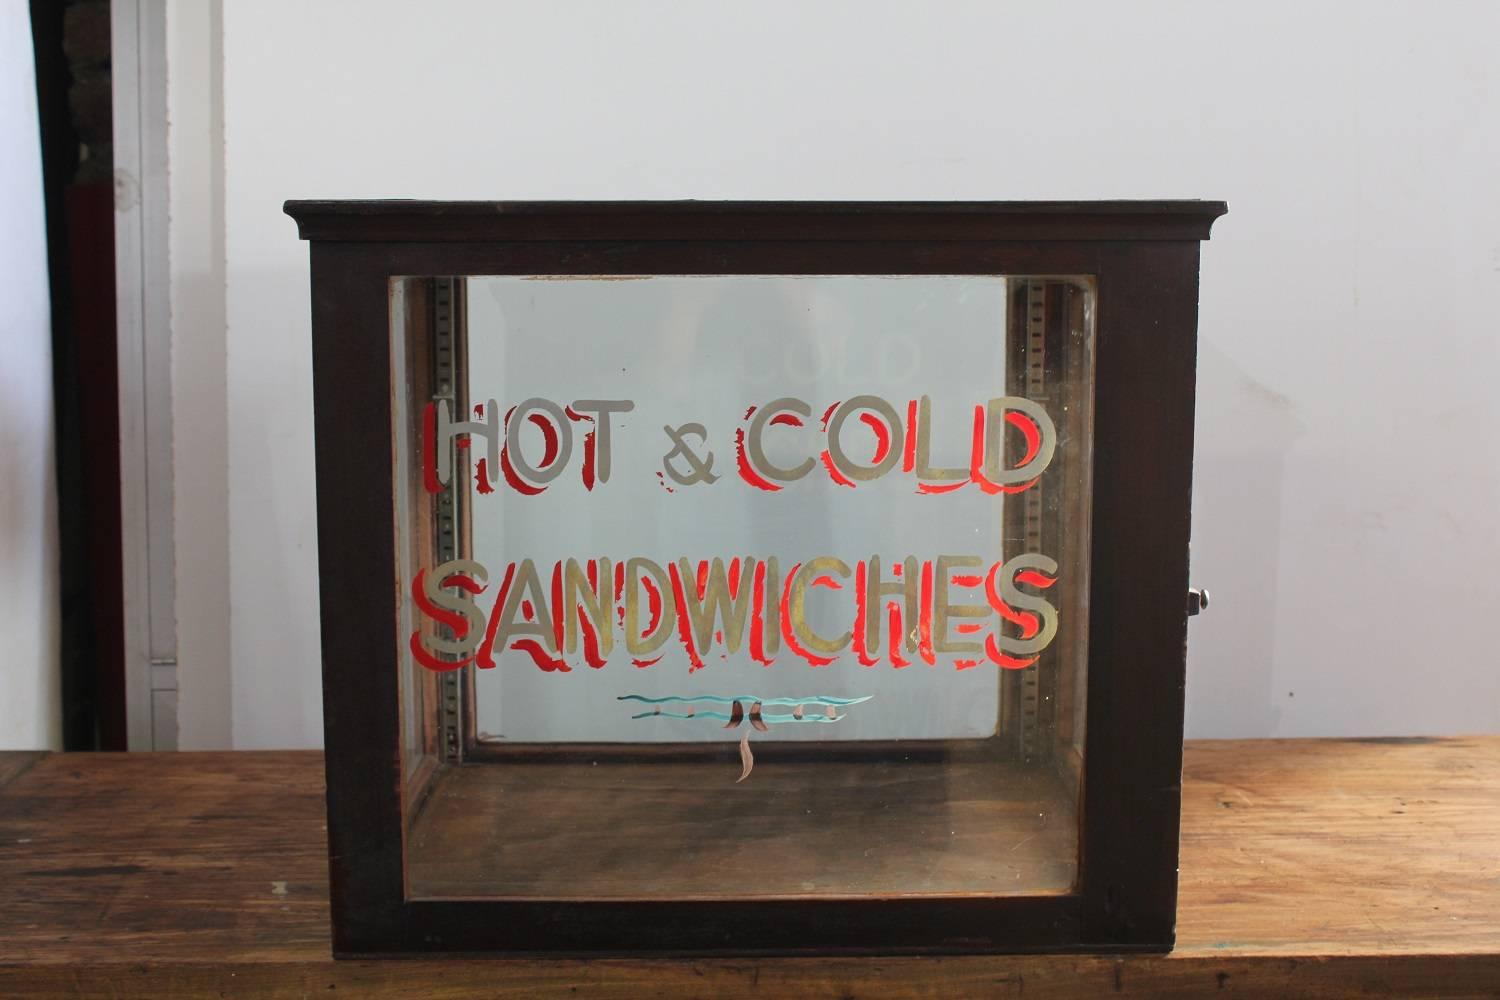 1930s Hot & Cold Sandwiches showcase. Original hand-painted sign.